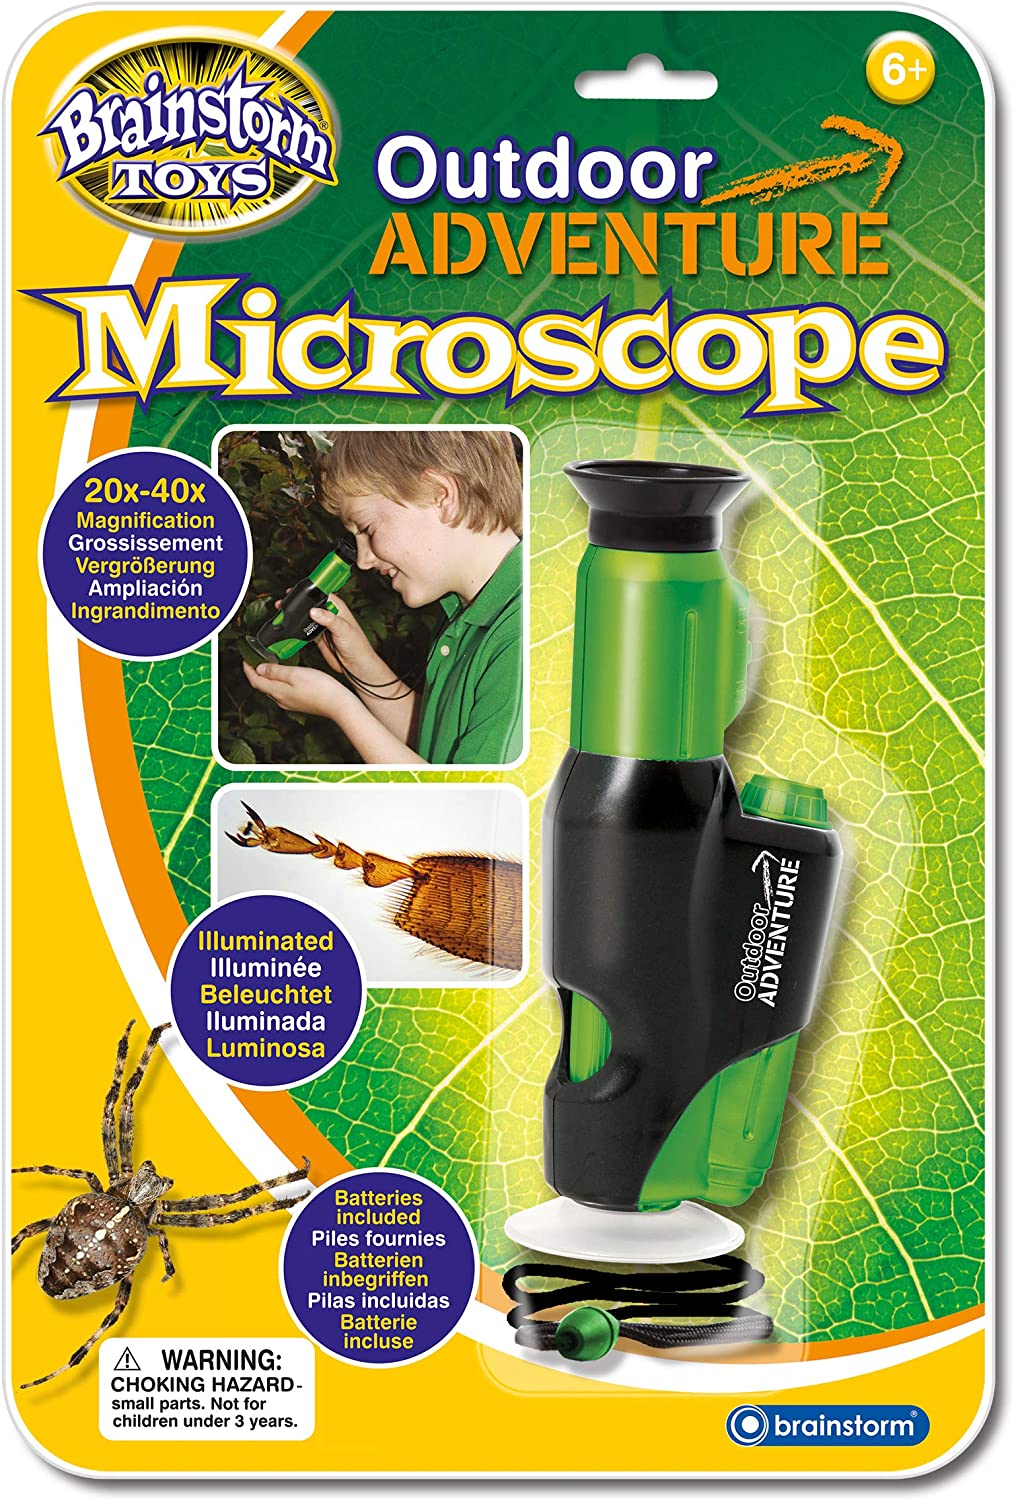 An image of Outdoor Adventure Microscope